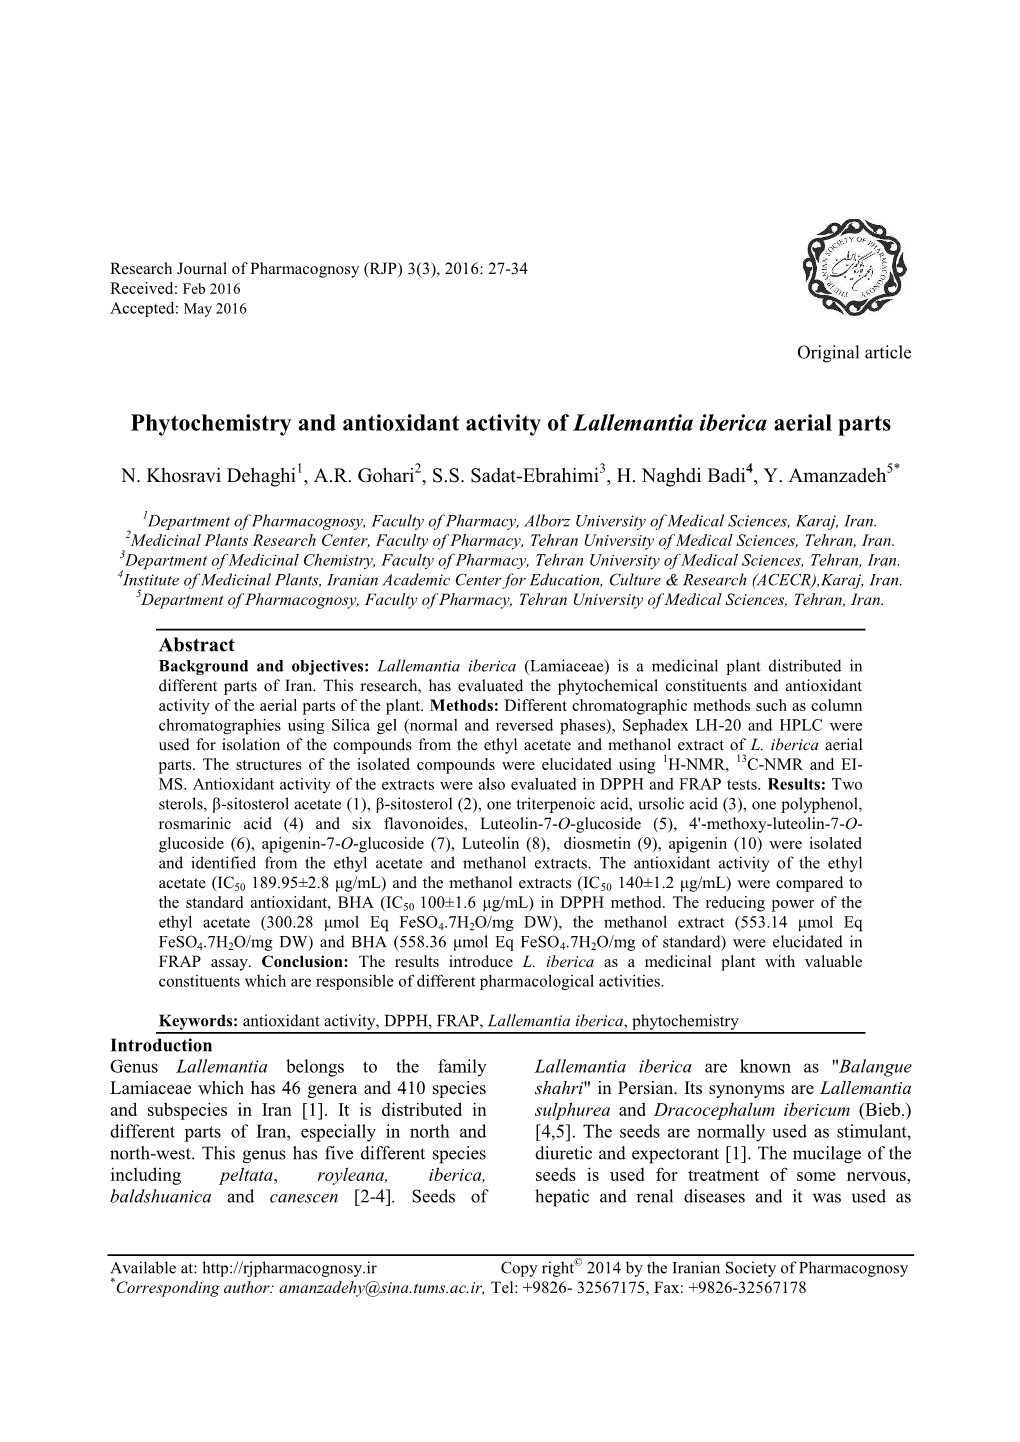 Phytochemistry and Antioxidant Activity of Lallemantia Iberica Aerial Parts